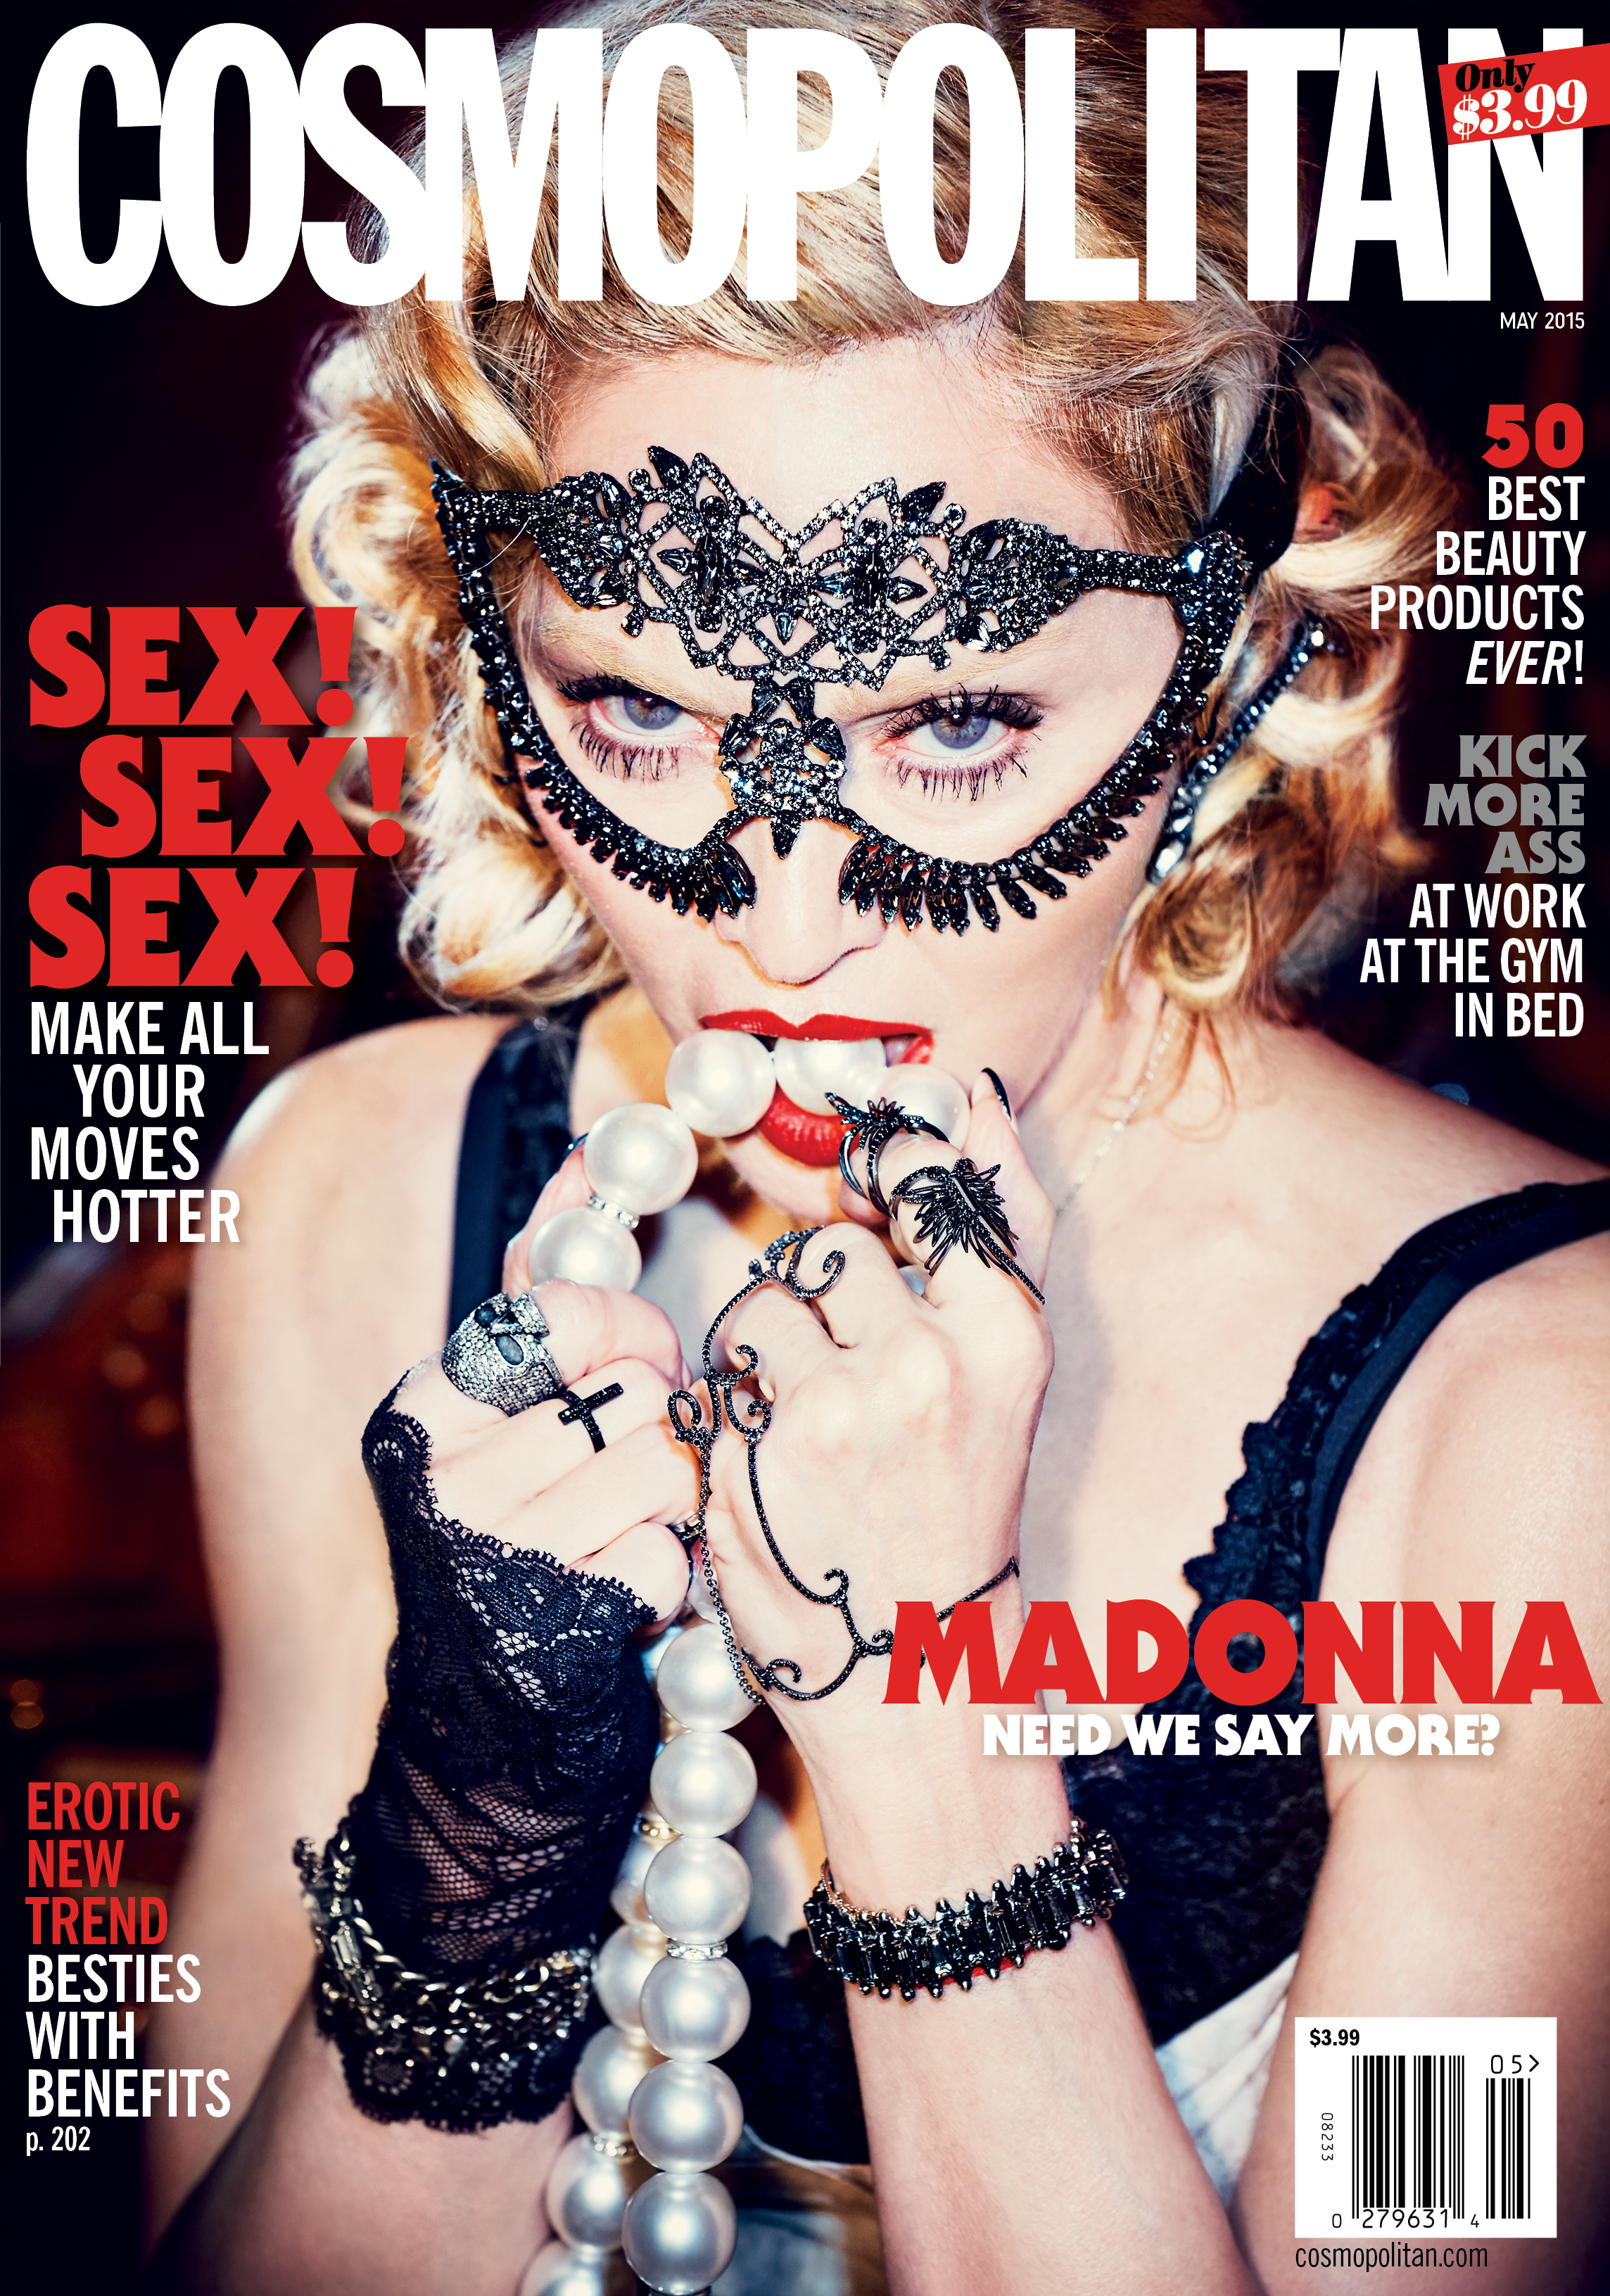 Cosmo-May-15-Cover-1.jpg